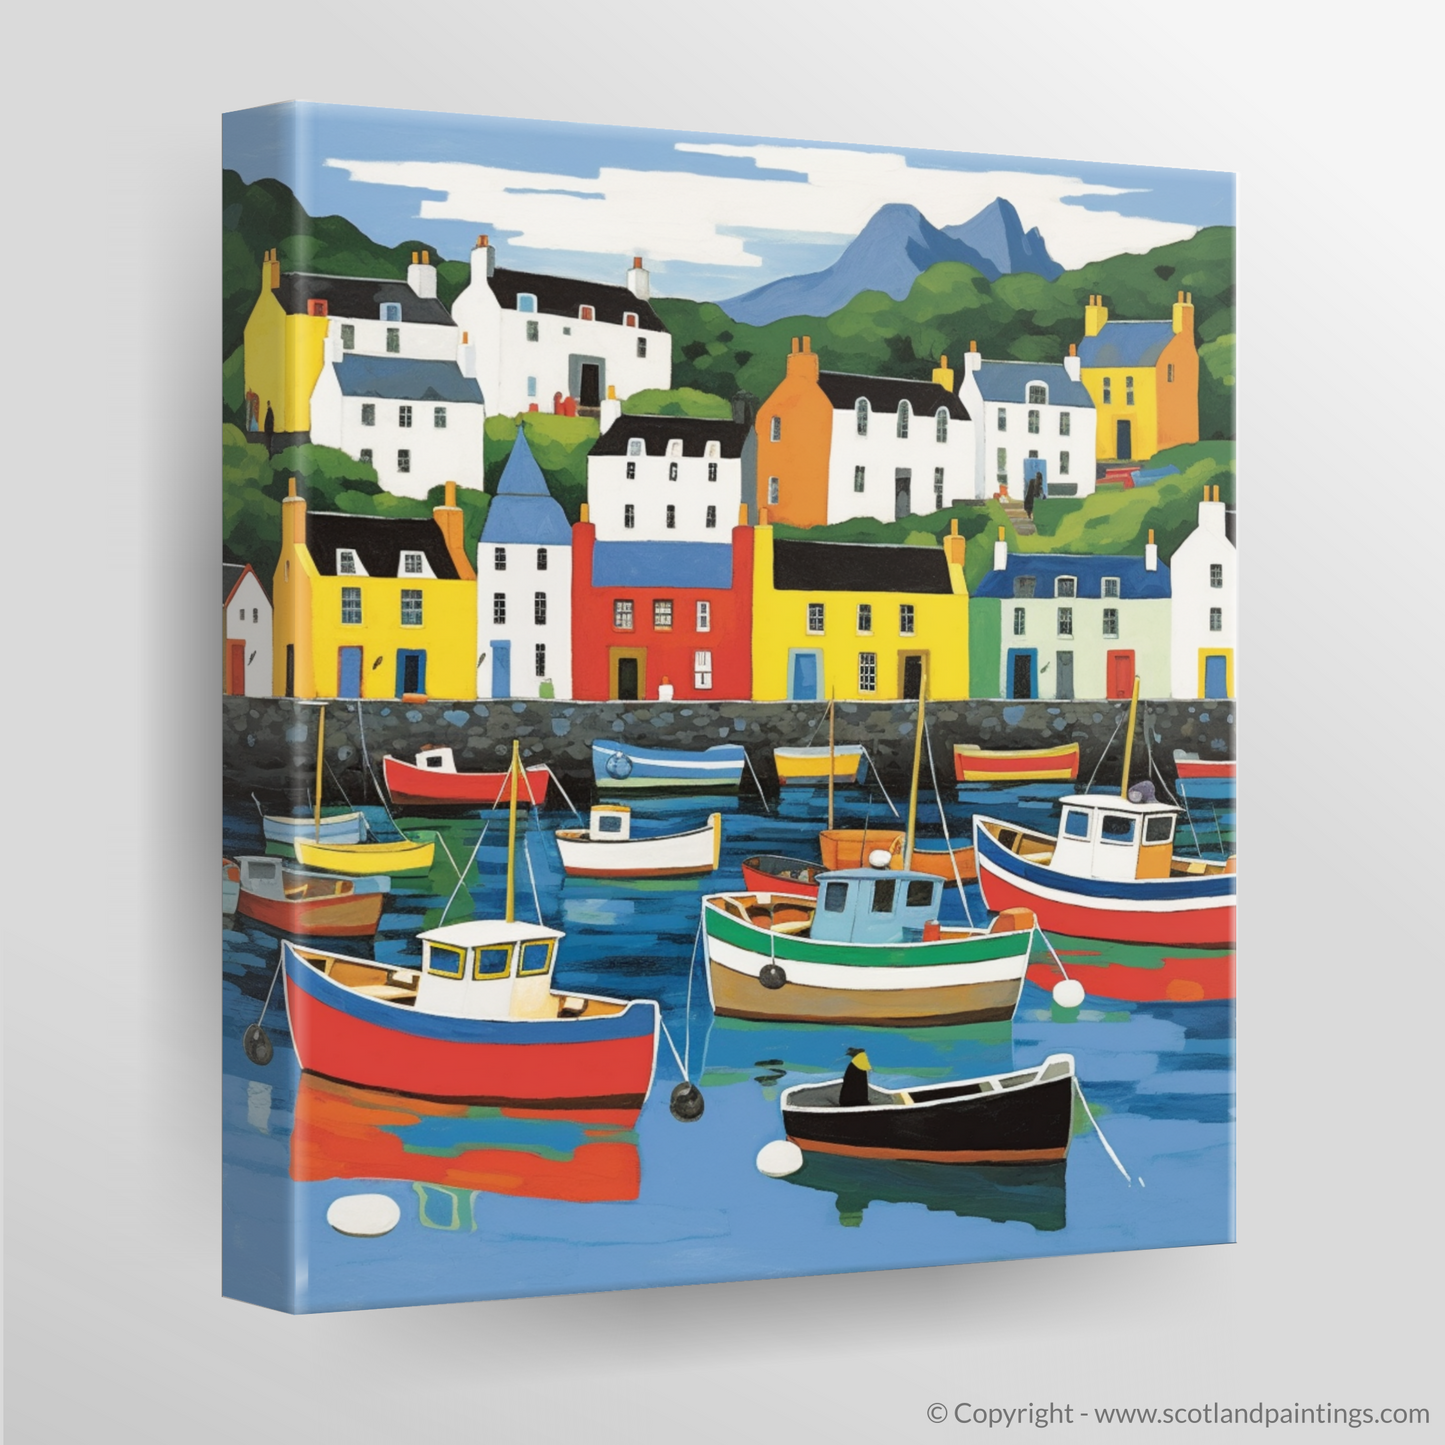 Vibrant Portree: A Pop Art Tribute to Isle of Skye's Picturesque Harbour